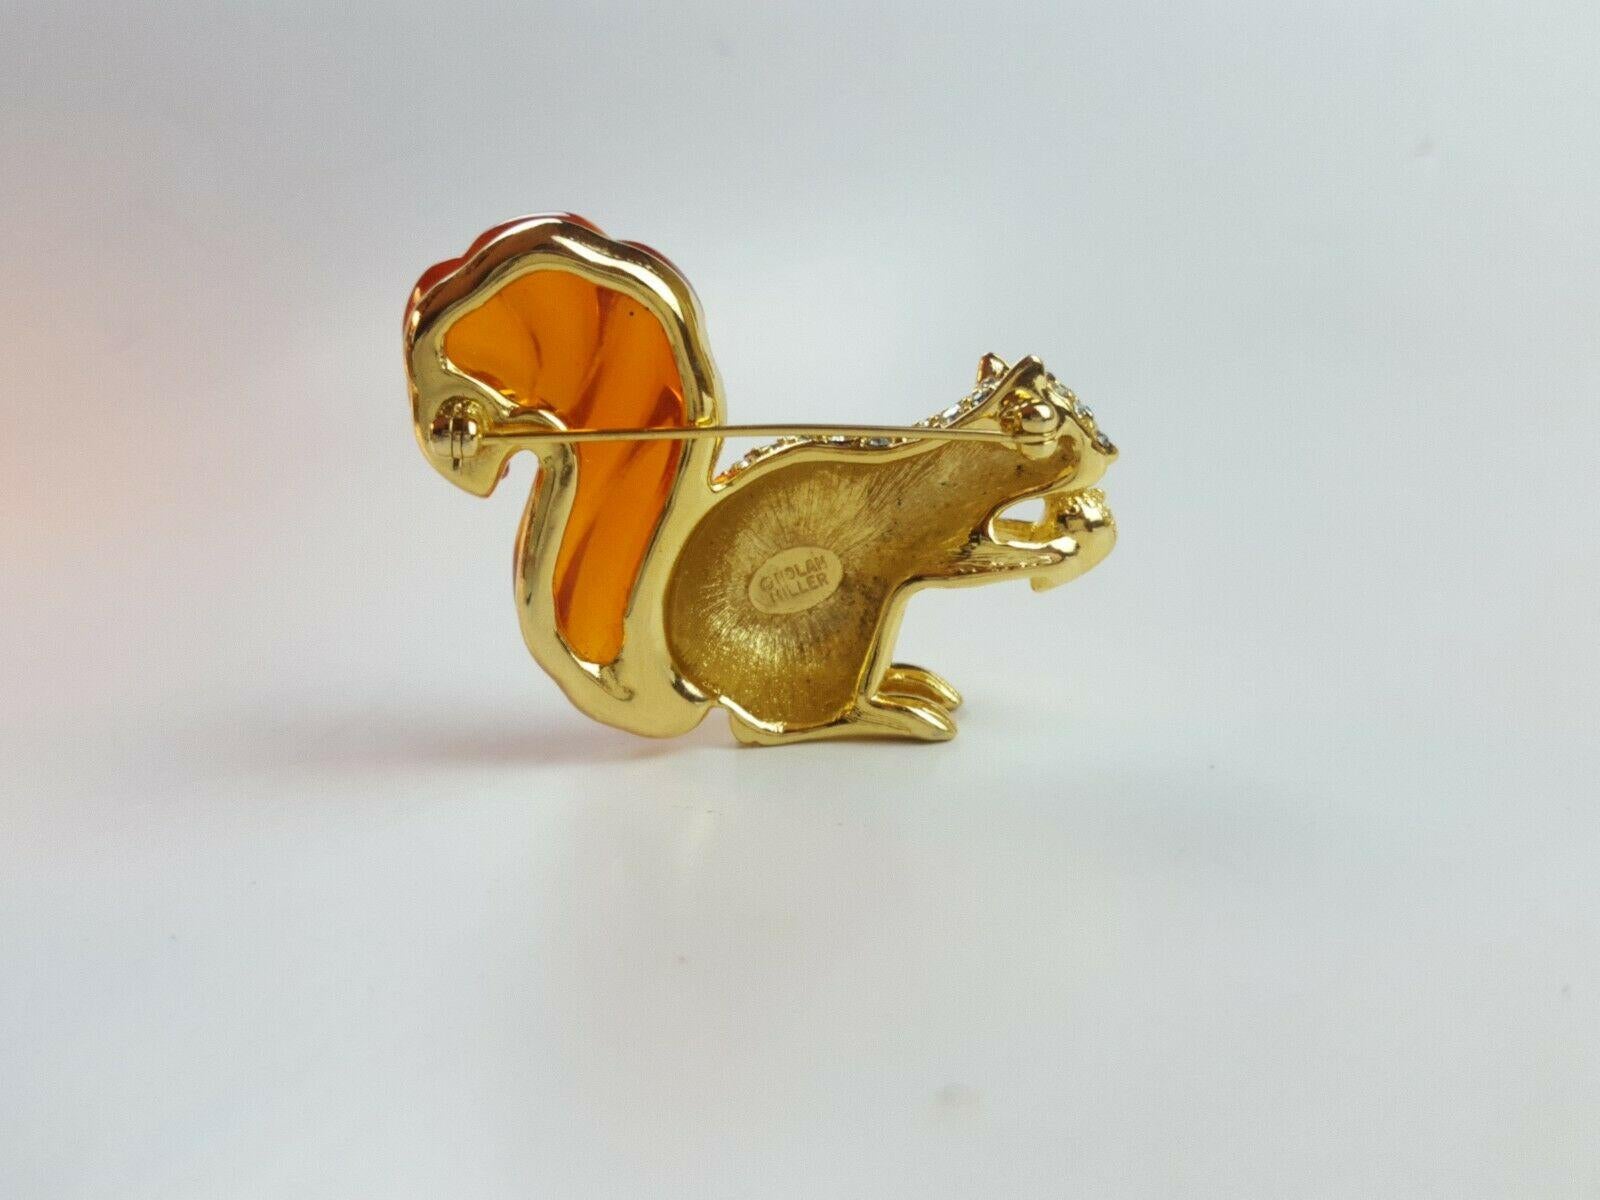 Vintage Brooch featuring a Squirrel holding an Acorn set with sparkling Rhinestones and displaying a Beautiful Amber Color Lucite Tail; Gold plate mounting; glass beads; Signed NOLAN MILLER. 